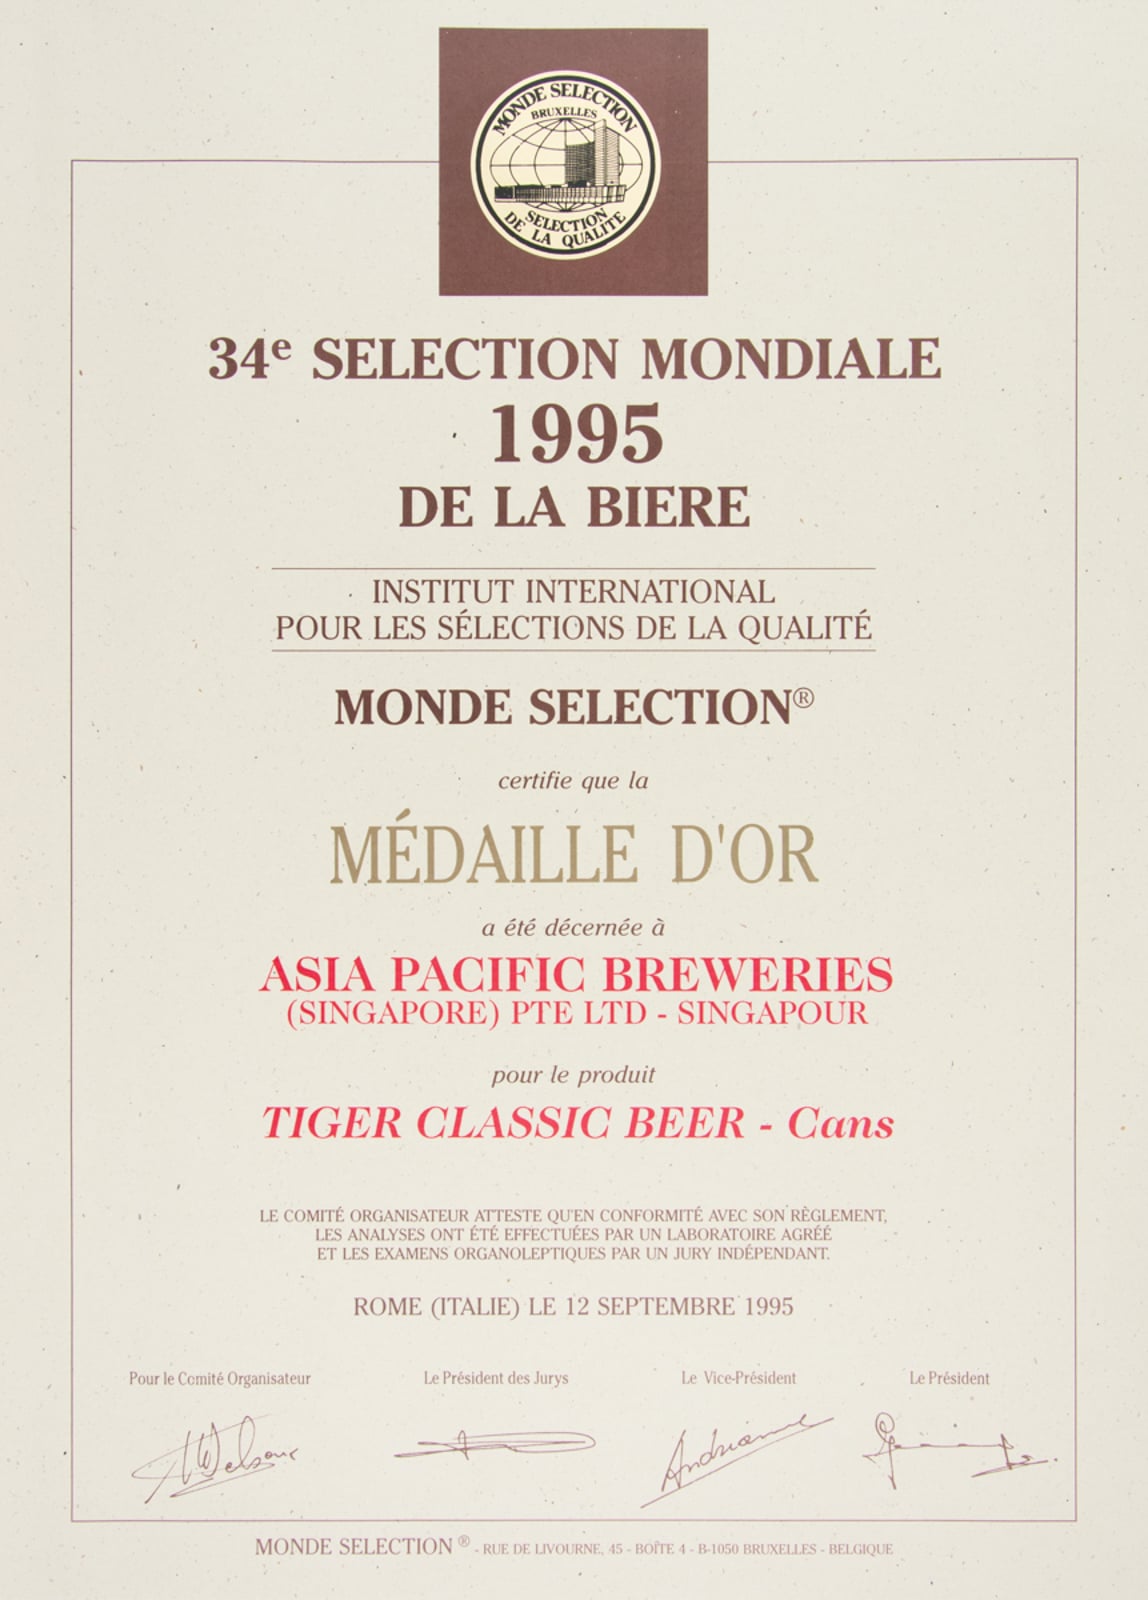 Tiger - Classic Beer (Cans) Médaille d'Or, Monde Selection Certificate 1995